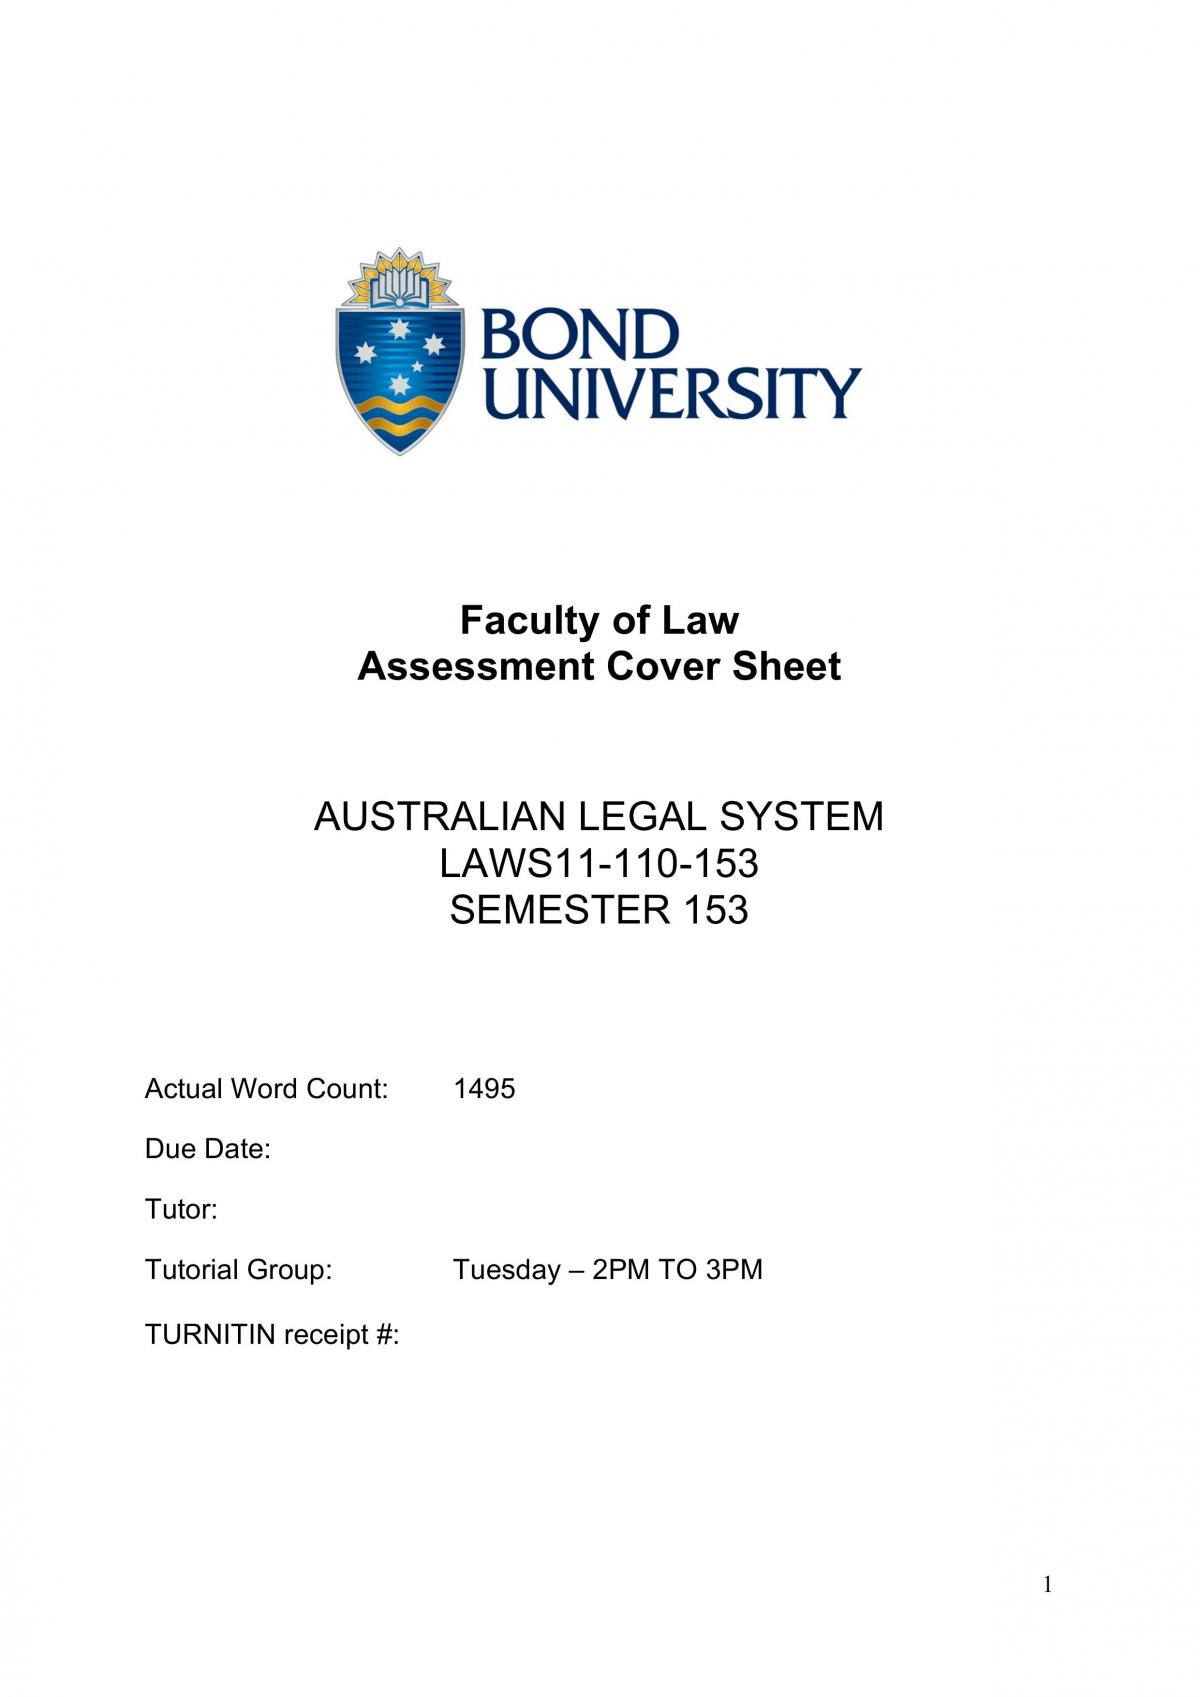 legal assignment nsw